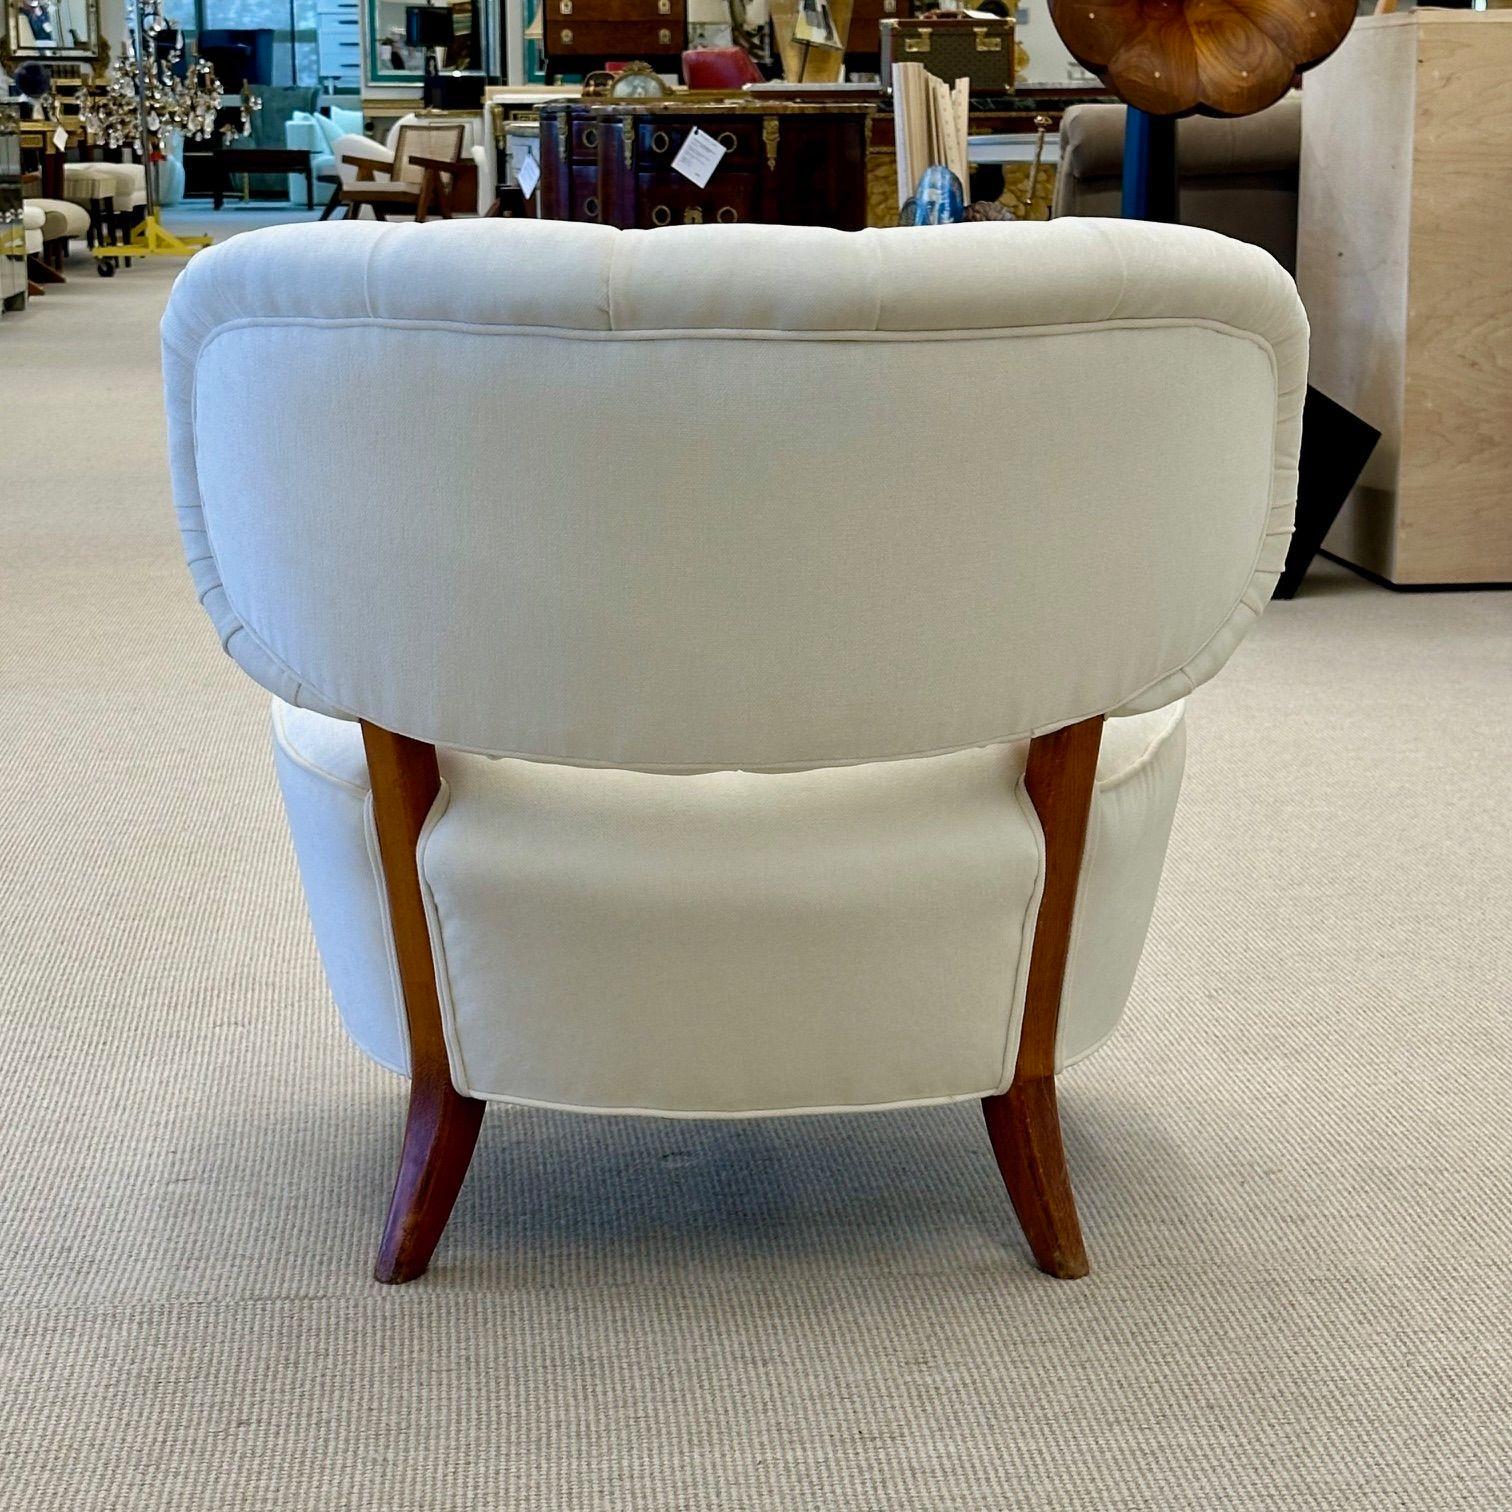 Otto Schulz, Mid-Century Lounge Chairs, White Velvet, Beech, Sweden, 1940s For Sale 6